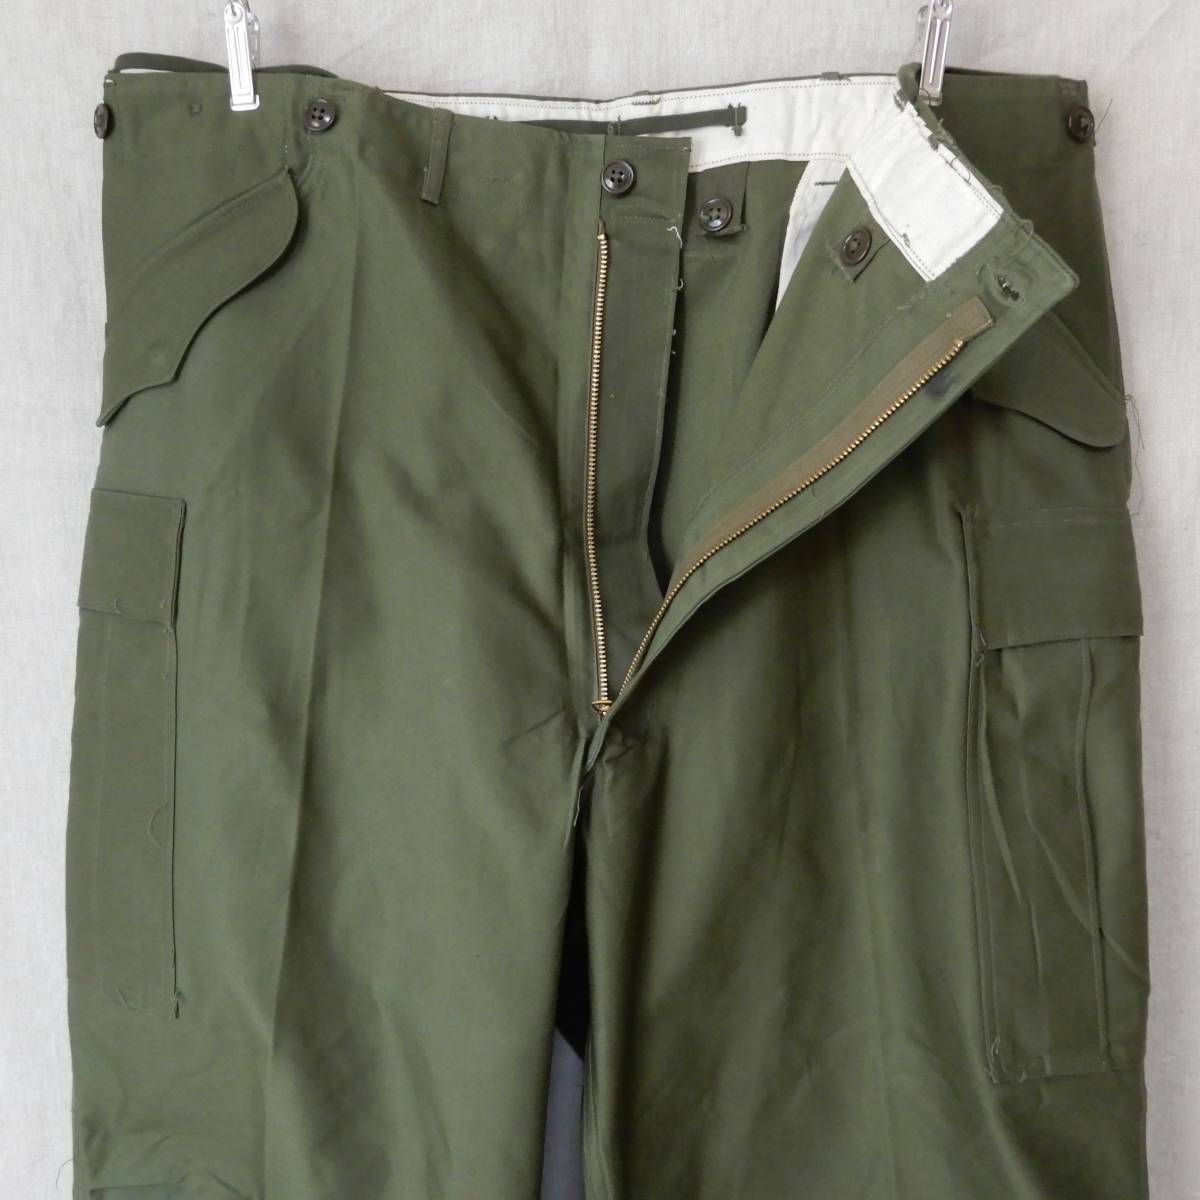 US ARMY M FIELD TROUSERS REGULAR X LARGE Deadstock ③